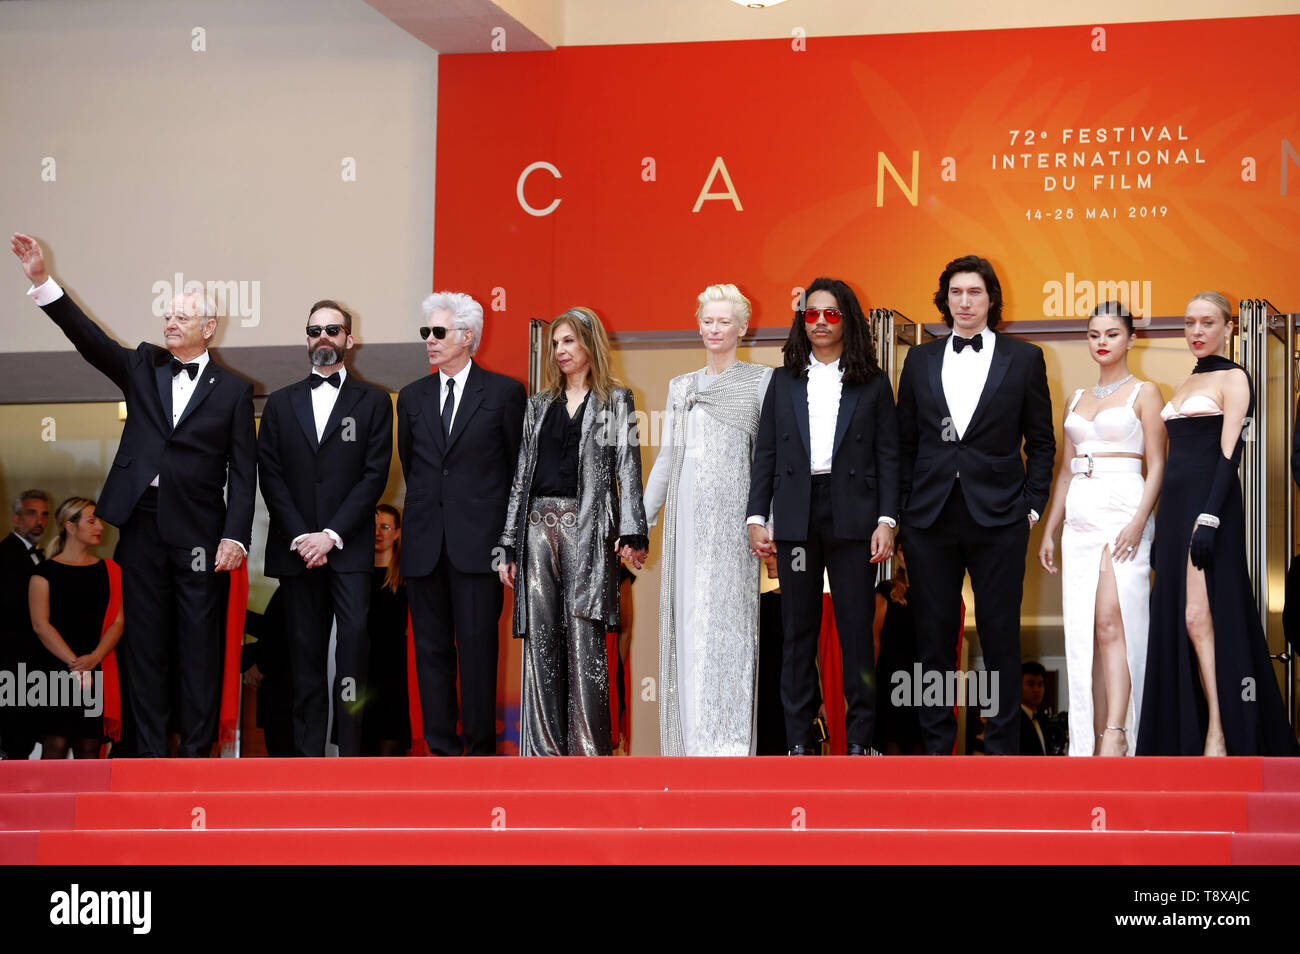 Bill Murray, Carter Logan, Jim Jarmusch, Sara Driver, Tilda Swinton, Luka Sabbat, Adam Driver, Selena Gomez and Chloe Sevigny attending the opening ceremony and screening of 'The Dead Don't Die' during the 72nd Cannes Film Festival at the Palais des Festivals on May 14, 2019 in Cannes, France | usage worldwide Stock Photo